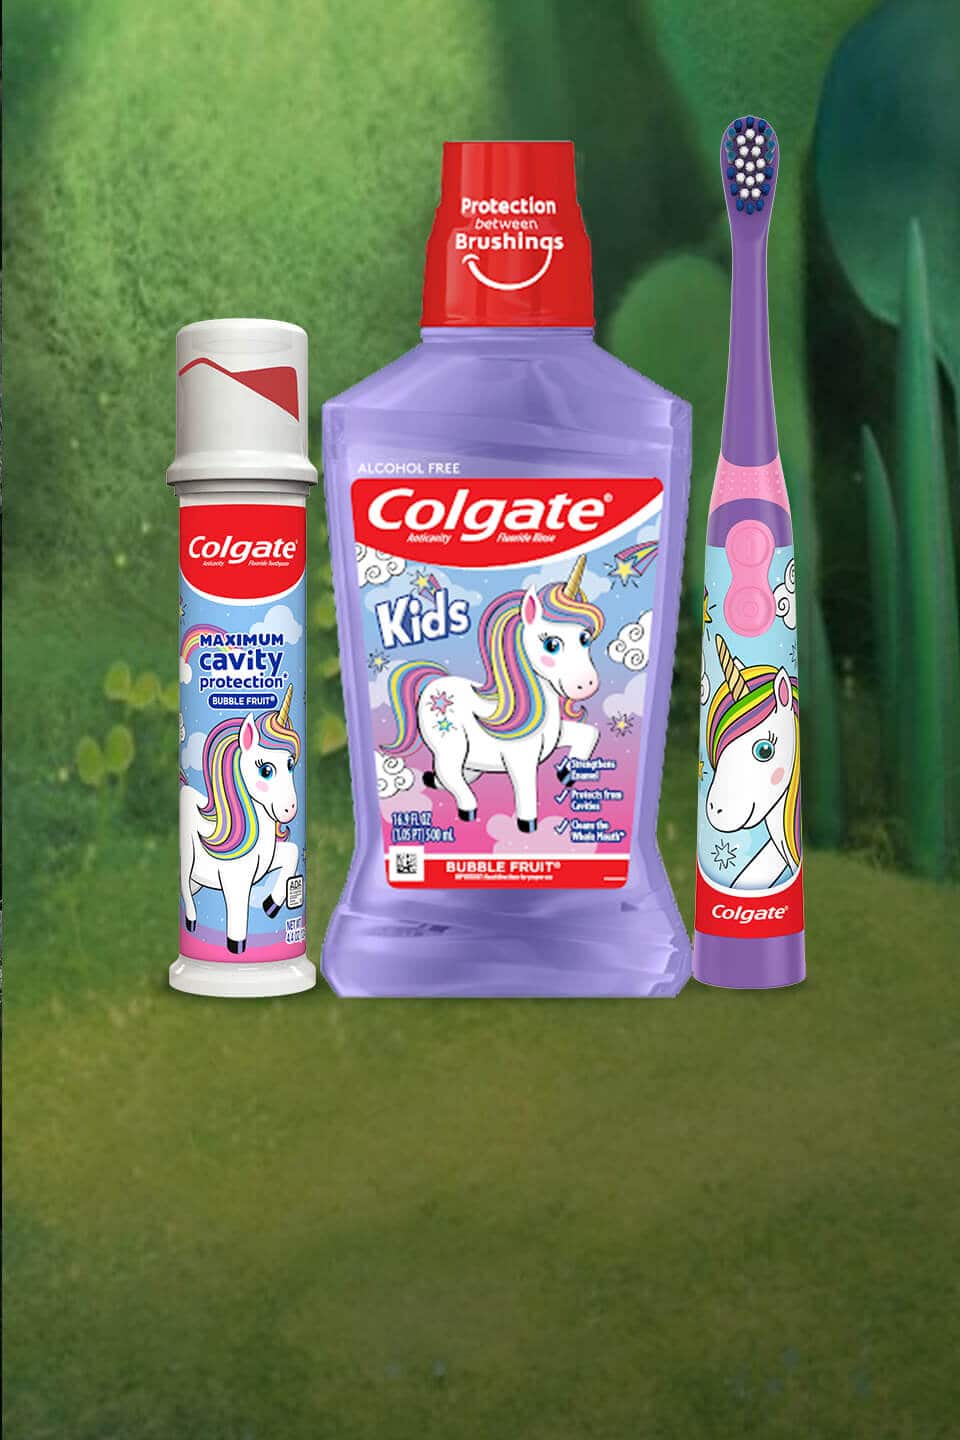 https://www.colgate.com/content/dam/cp-sites/oral-care/oral-care-center-relaunch/en-us/general/brands/colgate-kids-products-2022-new.jpg